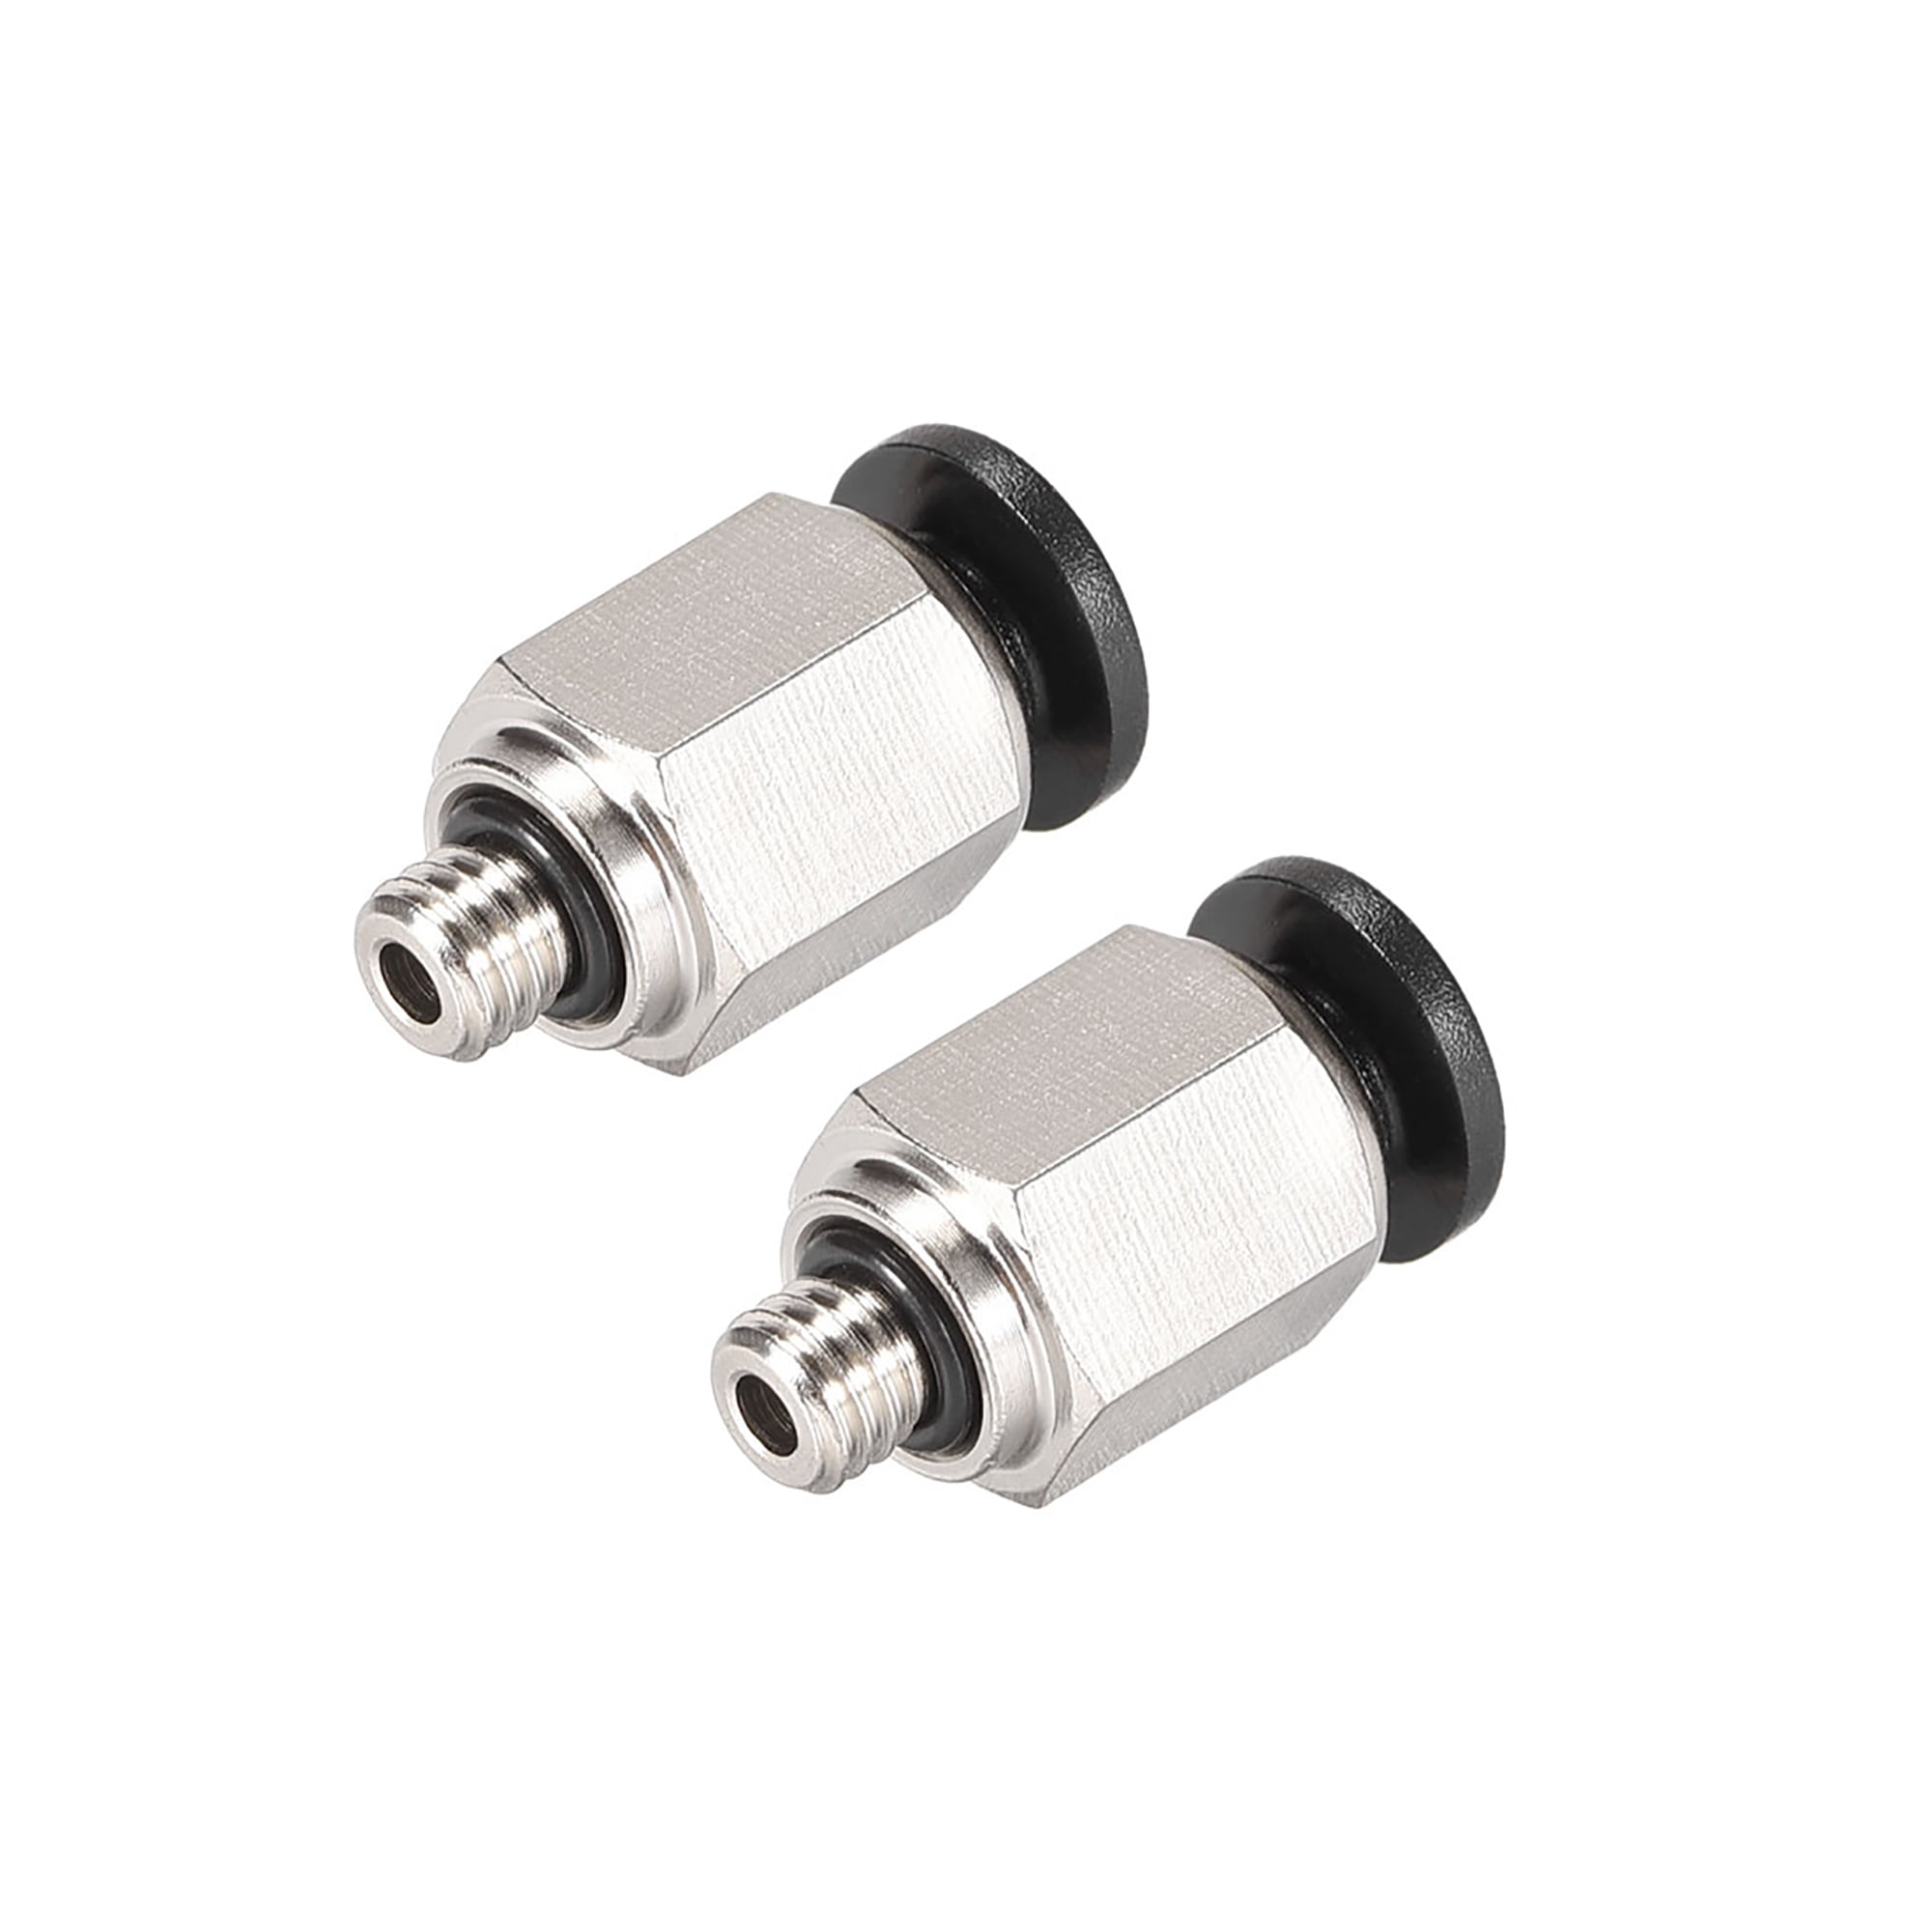 Straight Pneumatic Push to Quick Connect Fittings,M5 Male